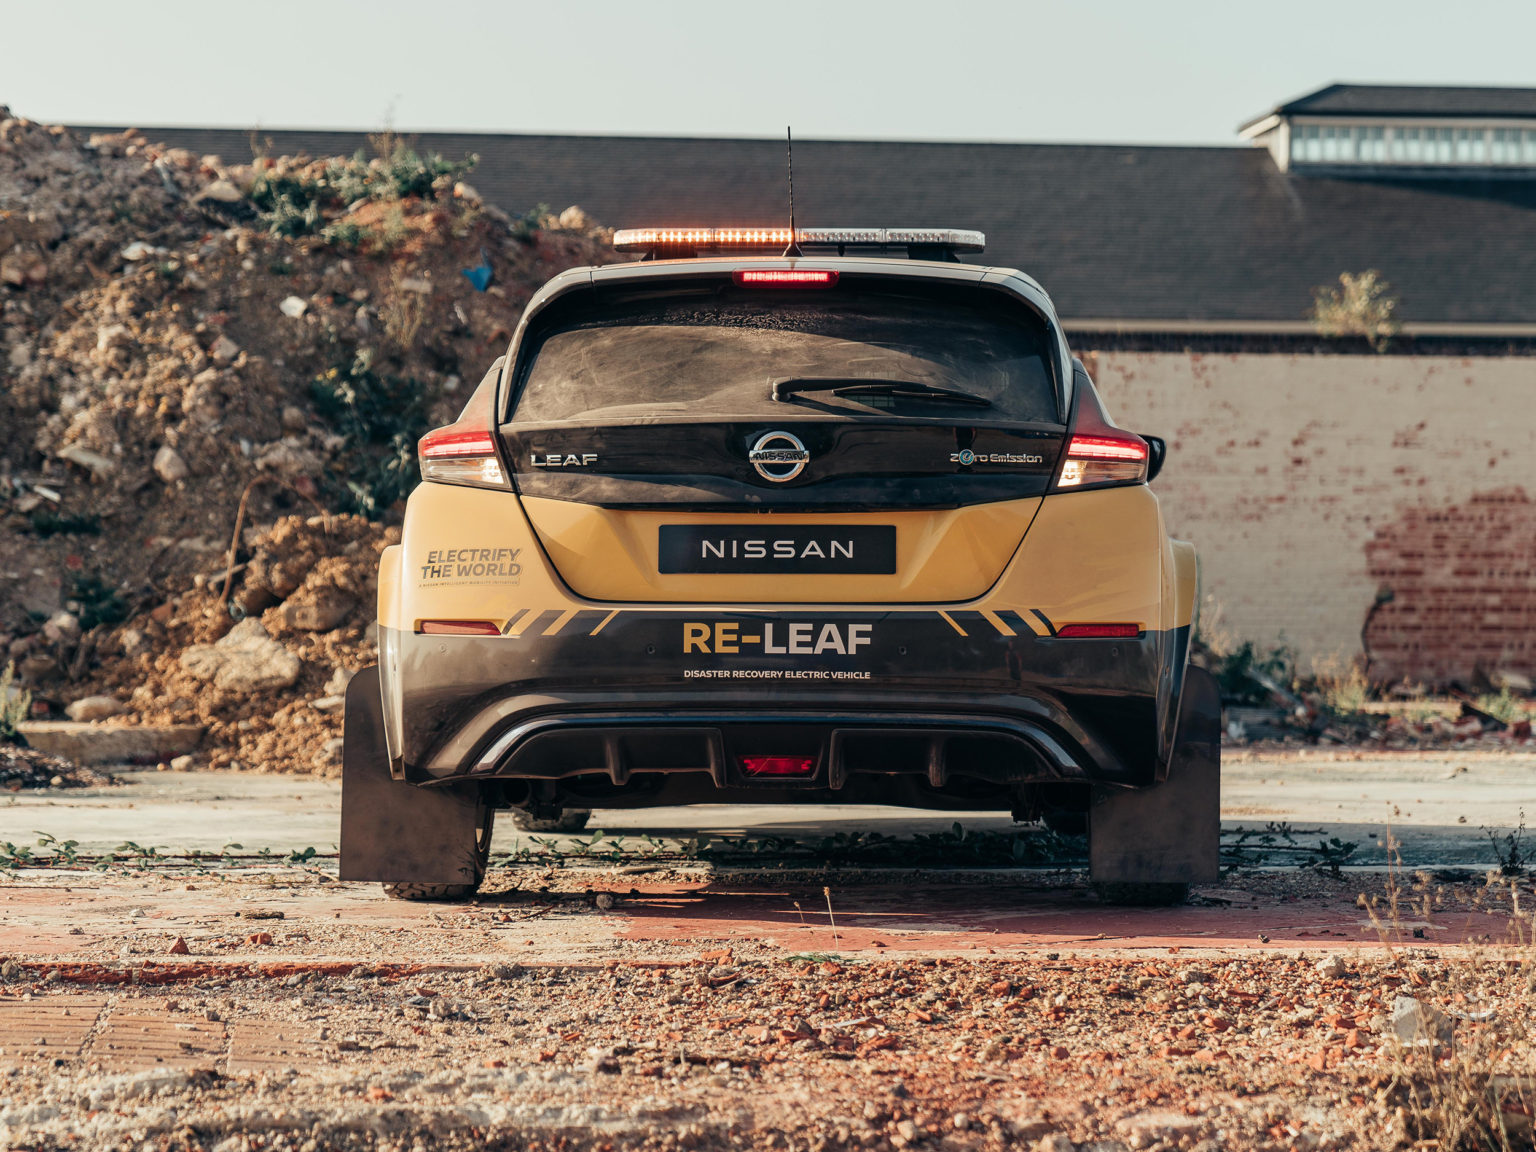 The Nissan Re-Leaf is designed to help in disaster zones.